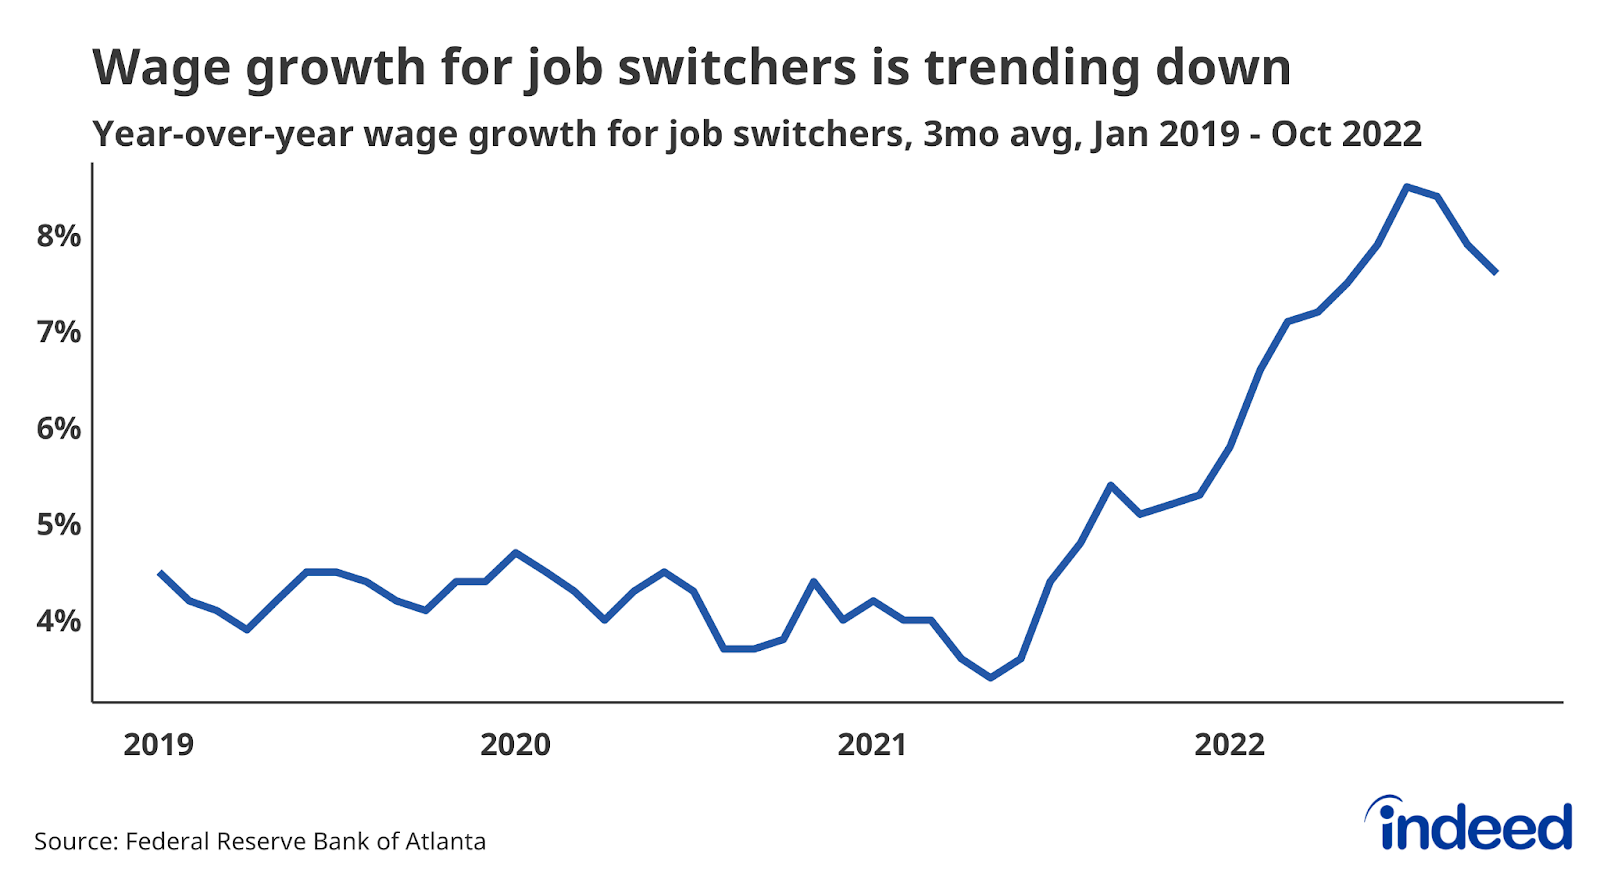 Line graph titled “Wage growth for job switchers is trending down” with a vertical axis from 4% to 8%. 